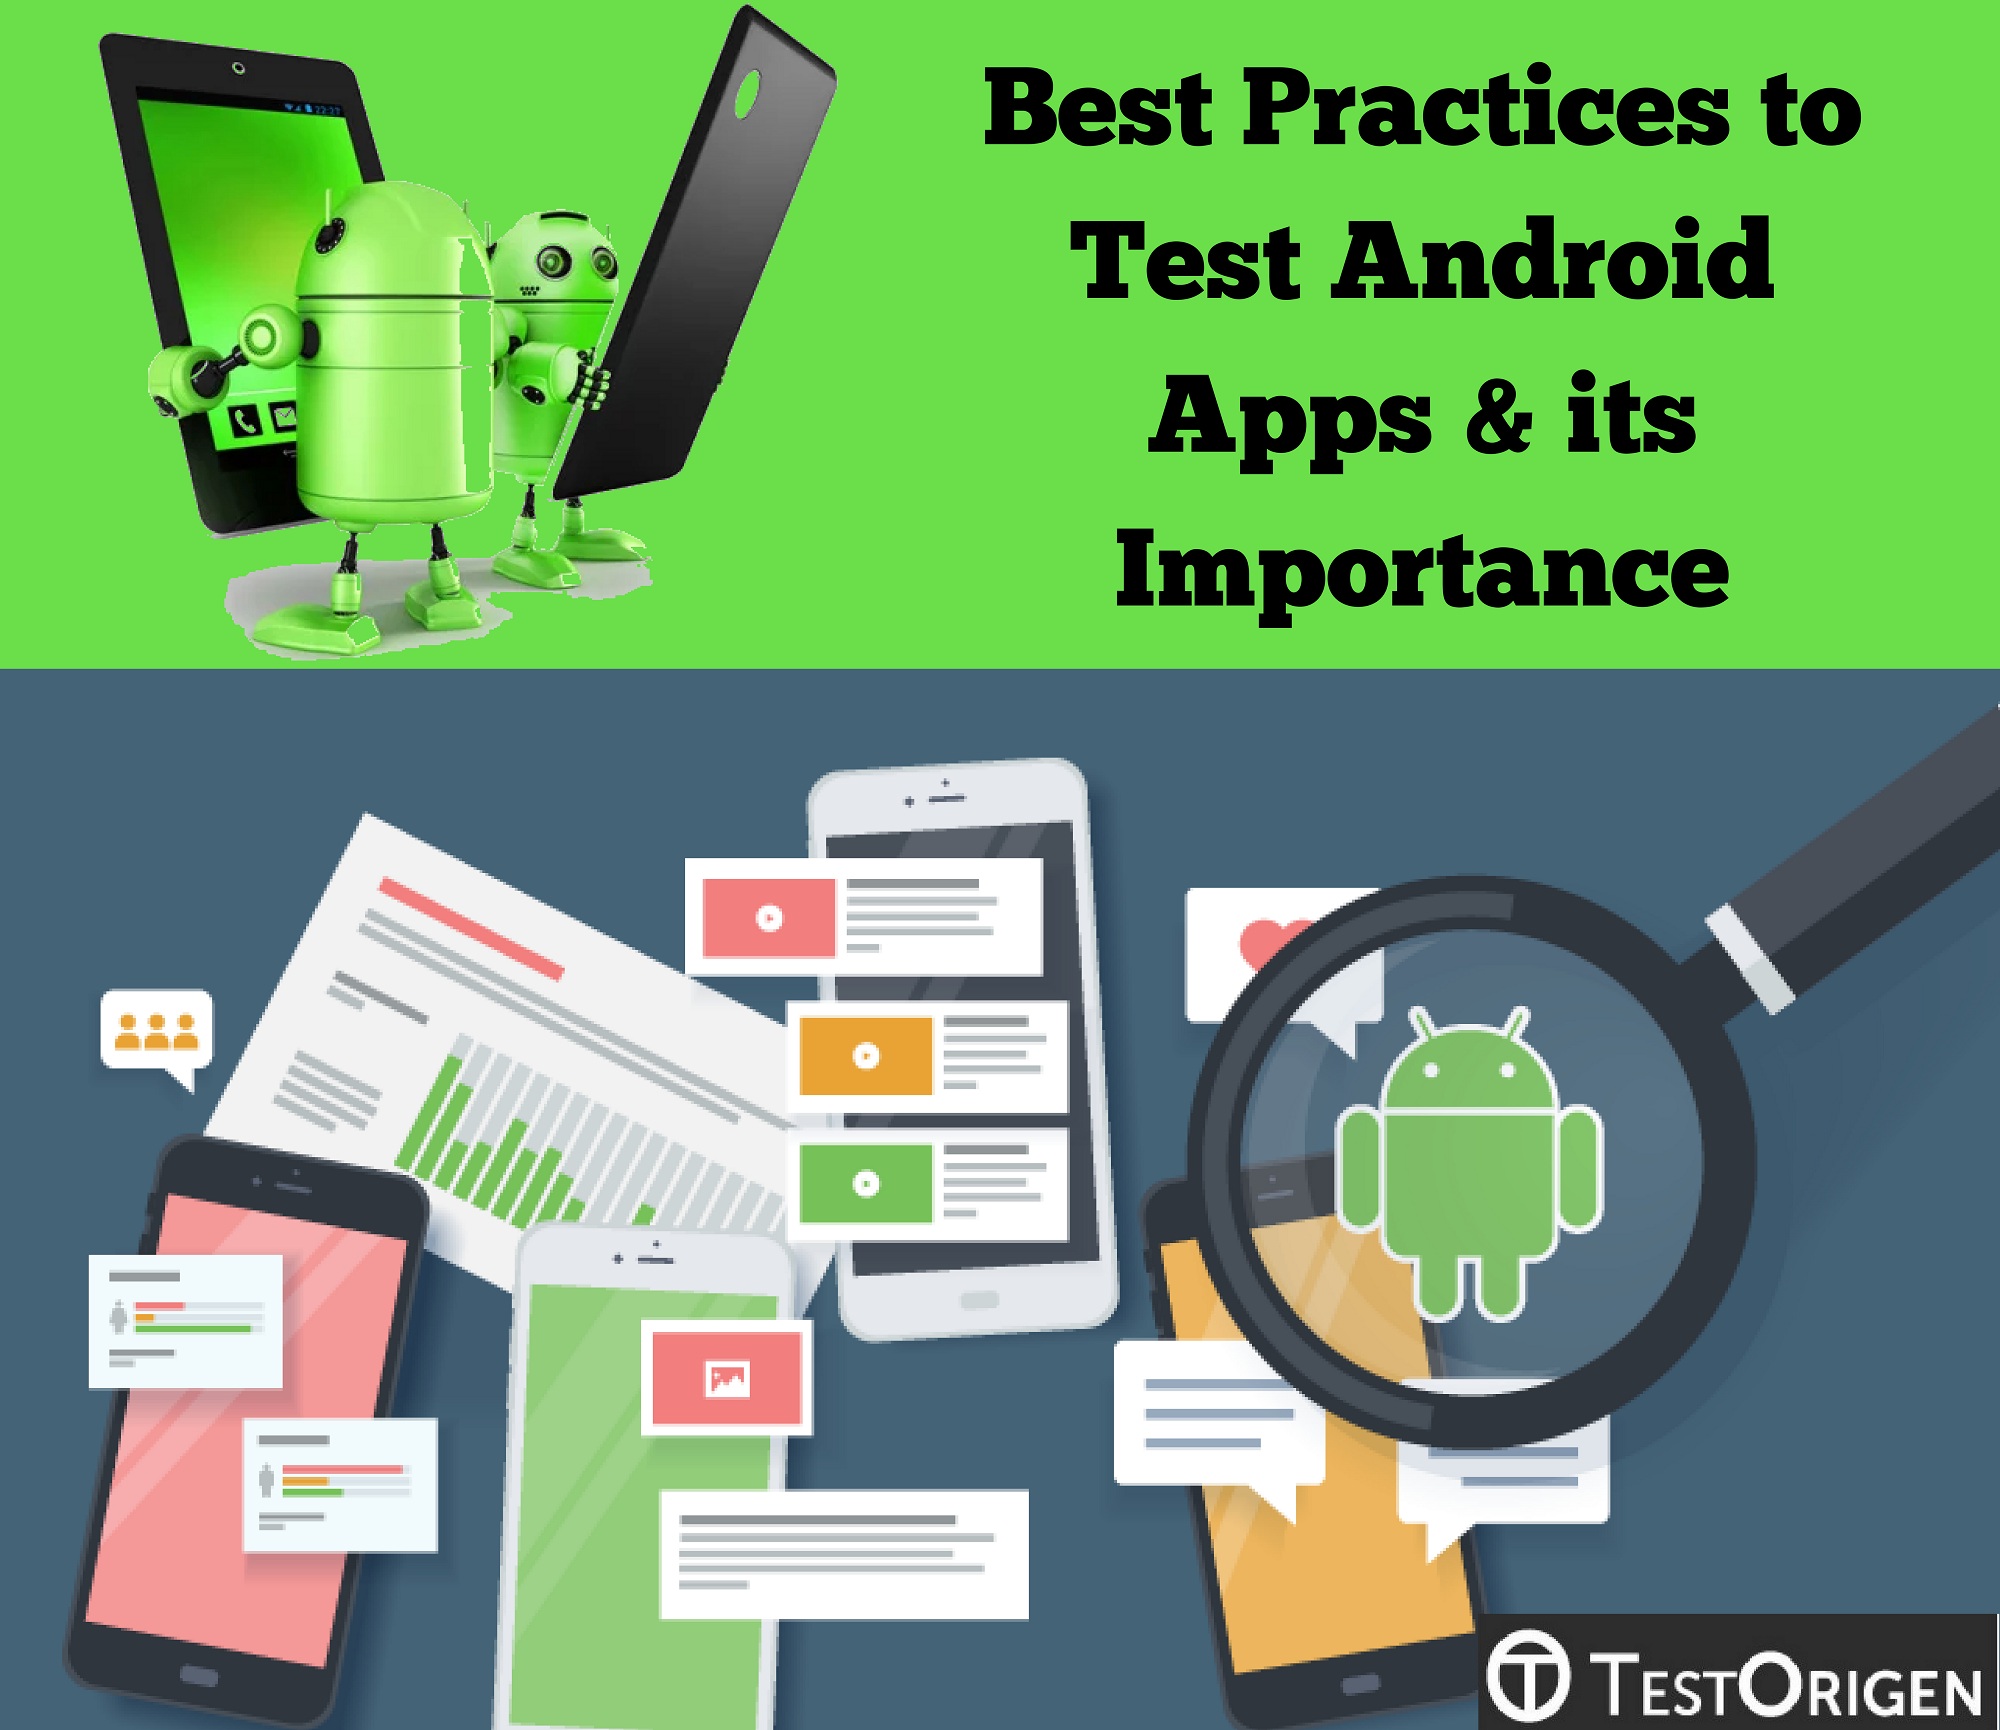 Best Practices to Test Android Apps & its Importance